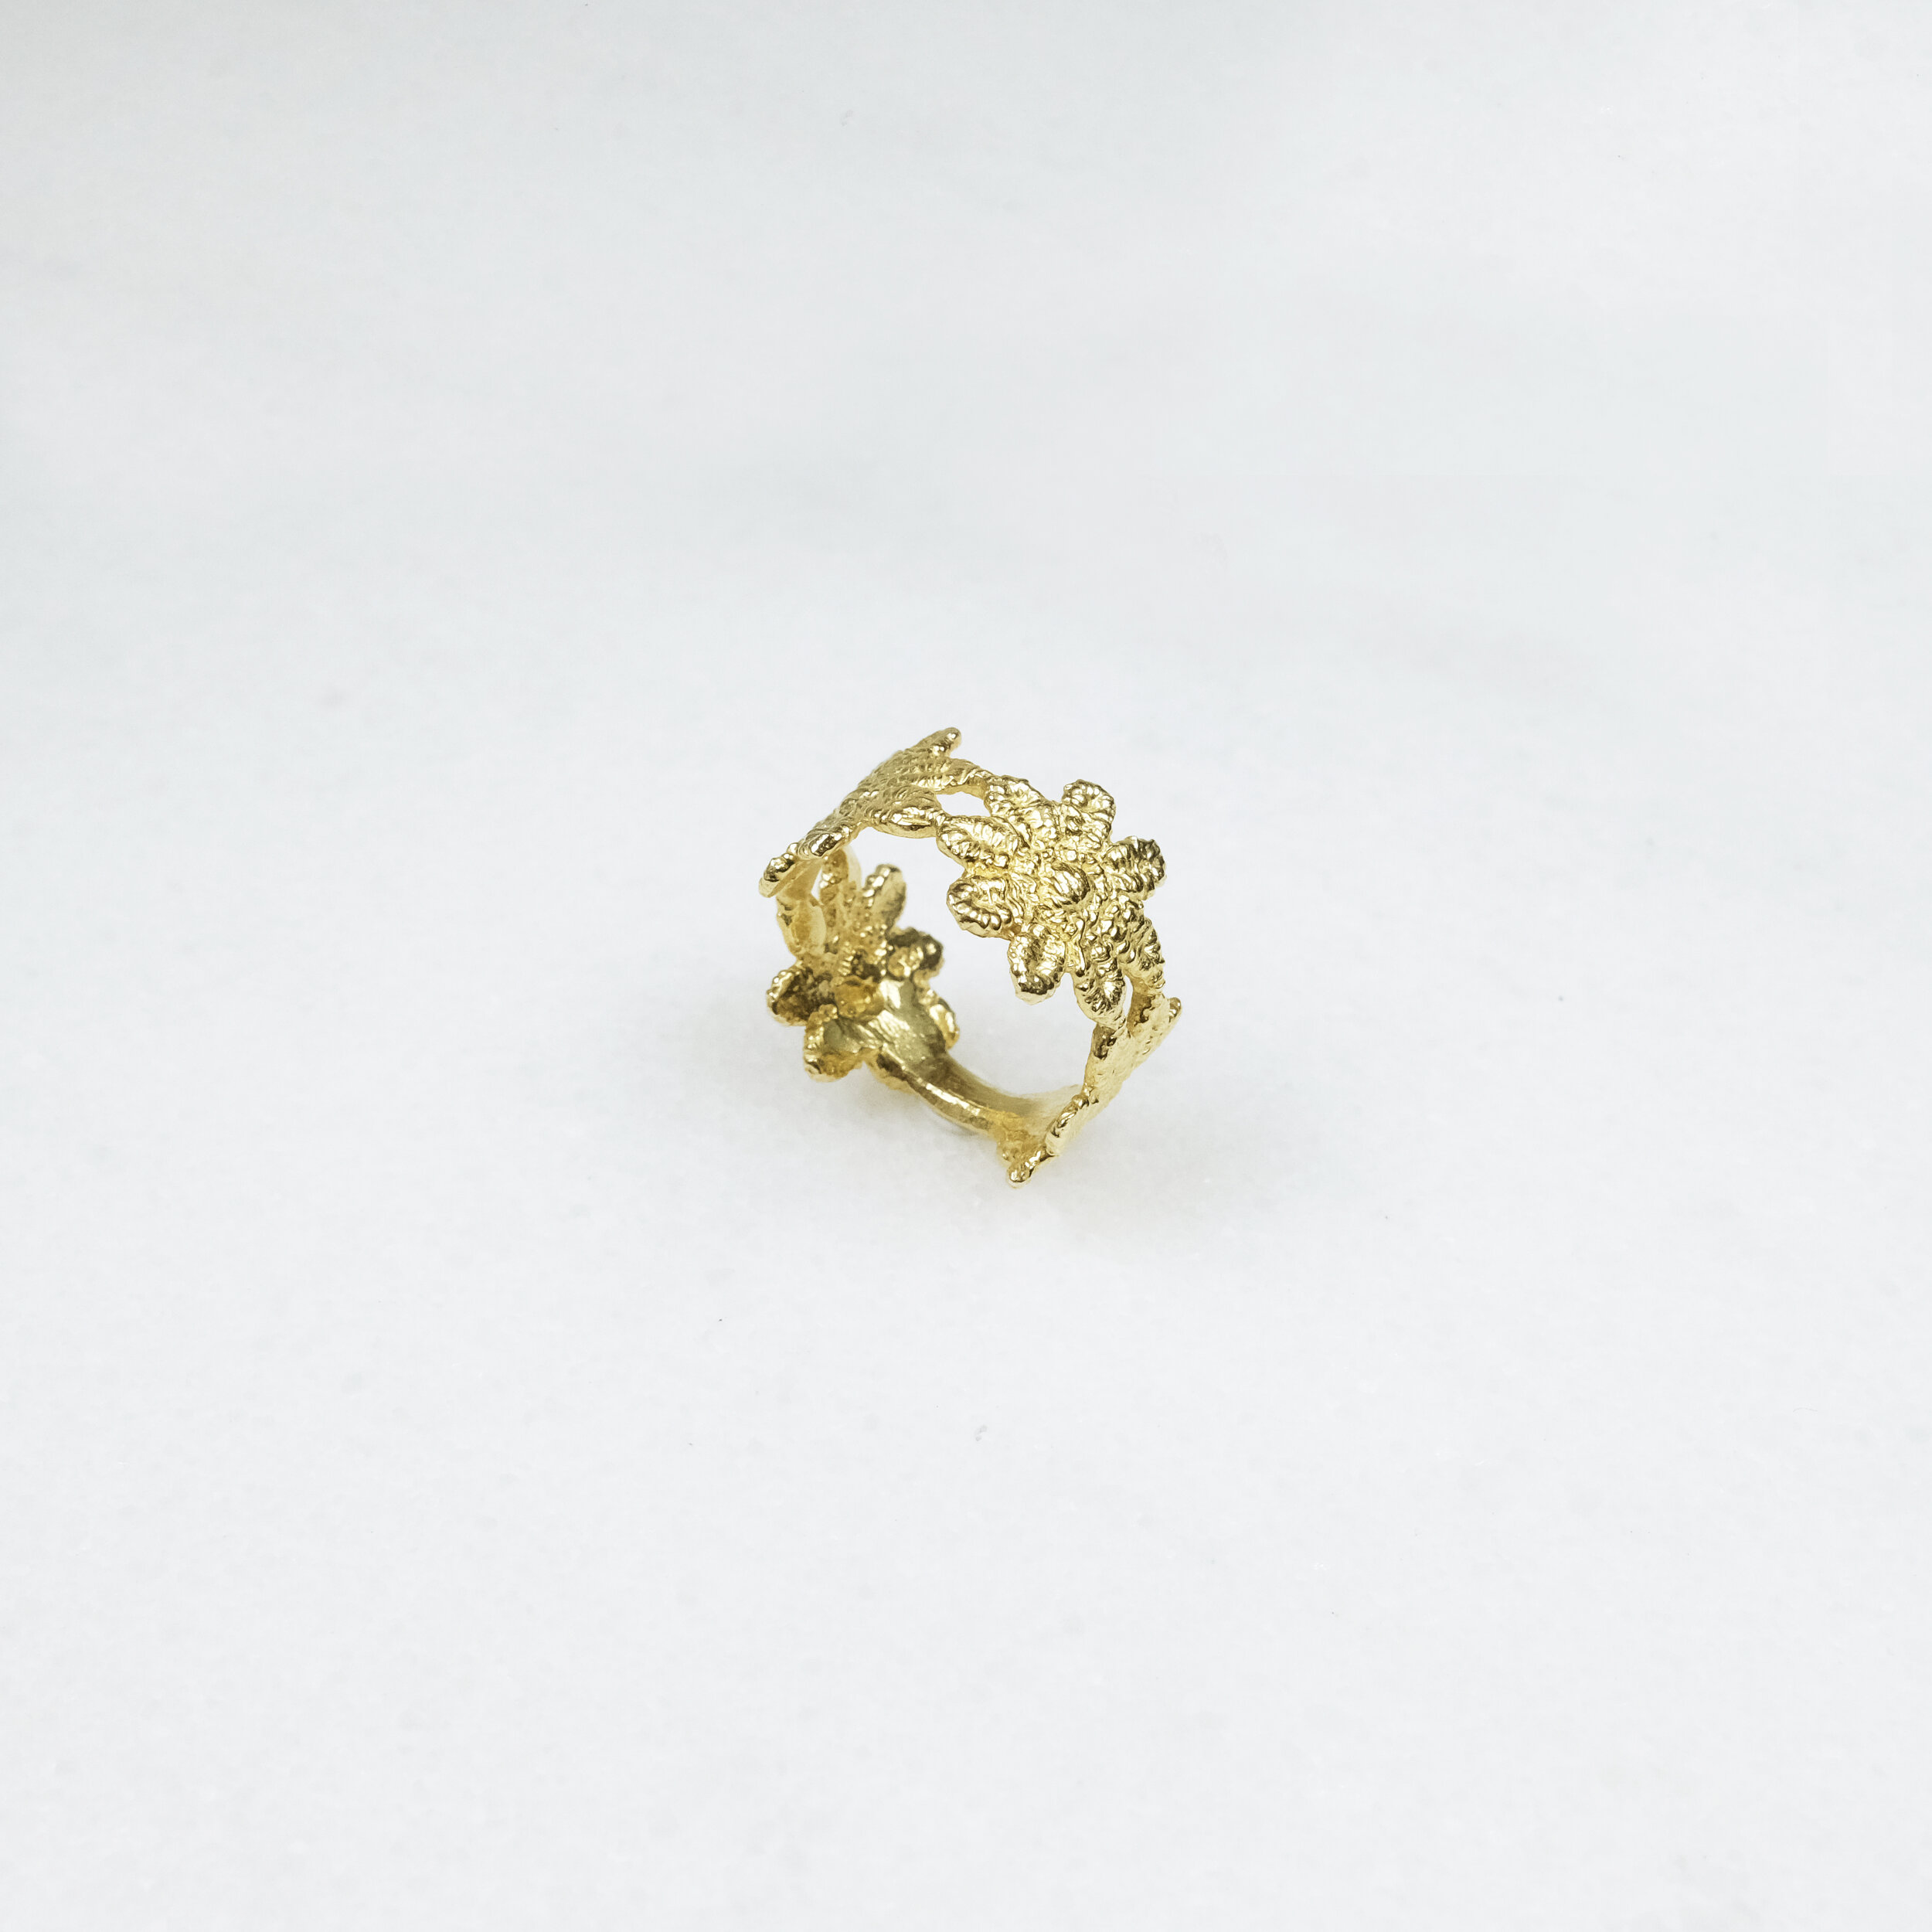 Buy Gold Plated Daily Wear Casting Ring Imitation Jewellery Online